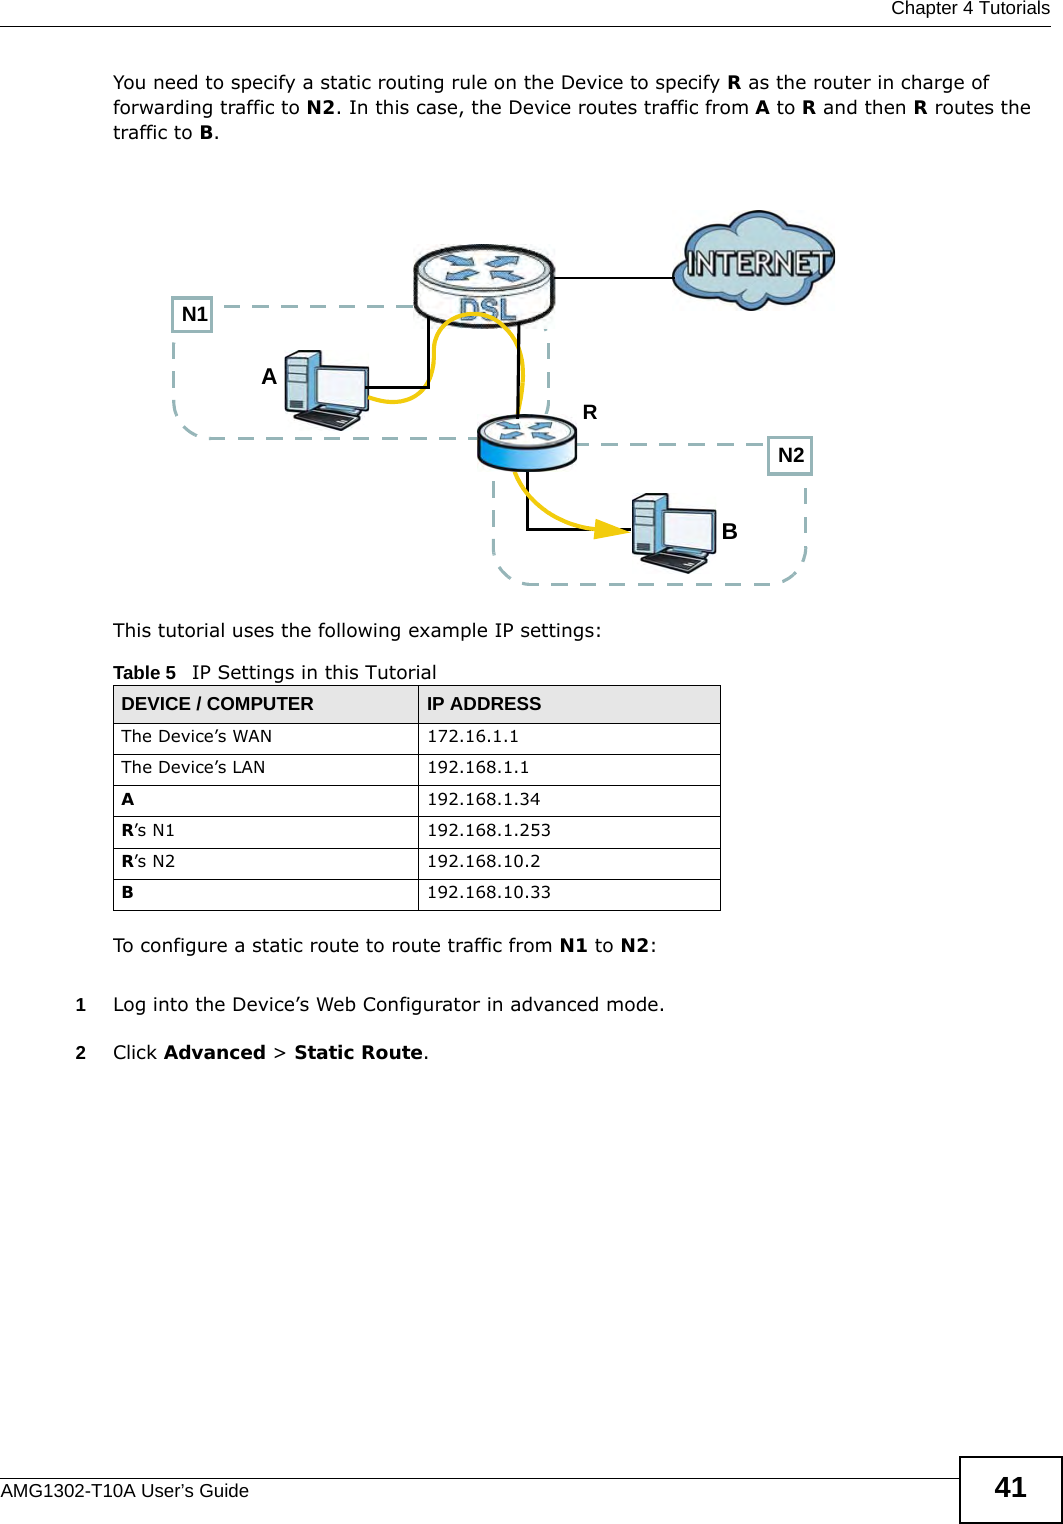  Chapter 4 TutorialsAMG1302-T10A User’s Guide 41You need to specify a static routing rule on the Device to specify R as the router in charge of forwarding traffic to N2. In this case, the Device routes traffic from A to R and then R routes the traffic to B.This tutorial uses the following example IP settings:To configure a static route to route traffic from N1 to N2:1Log into the Device’s Web Configurator in advanced mode.2Click Advanced &gt; Static Route.Table 5   IP Settings in this TutorialDEVICE / COMPUTER IP ADDRESSThe Device’s WAN 172.16.1.1The Device’s LAN 192.168.1.1A192.168.1.34R’s N1  192.168.1.253R’s N2  192.168.10.2B192.168.10.33N2BN1AR